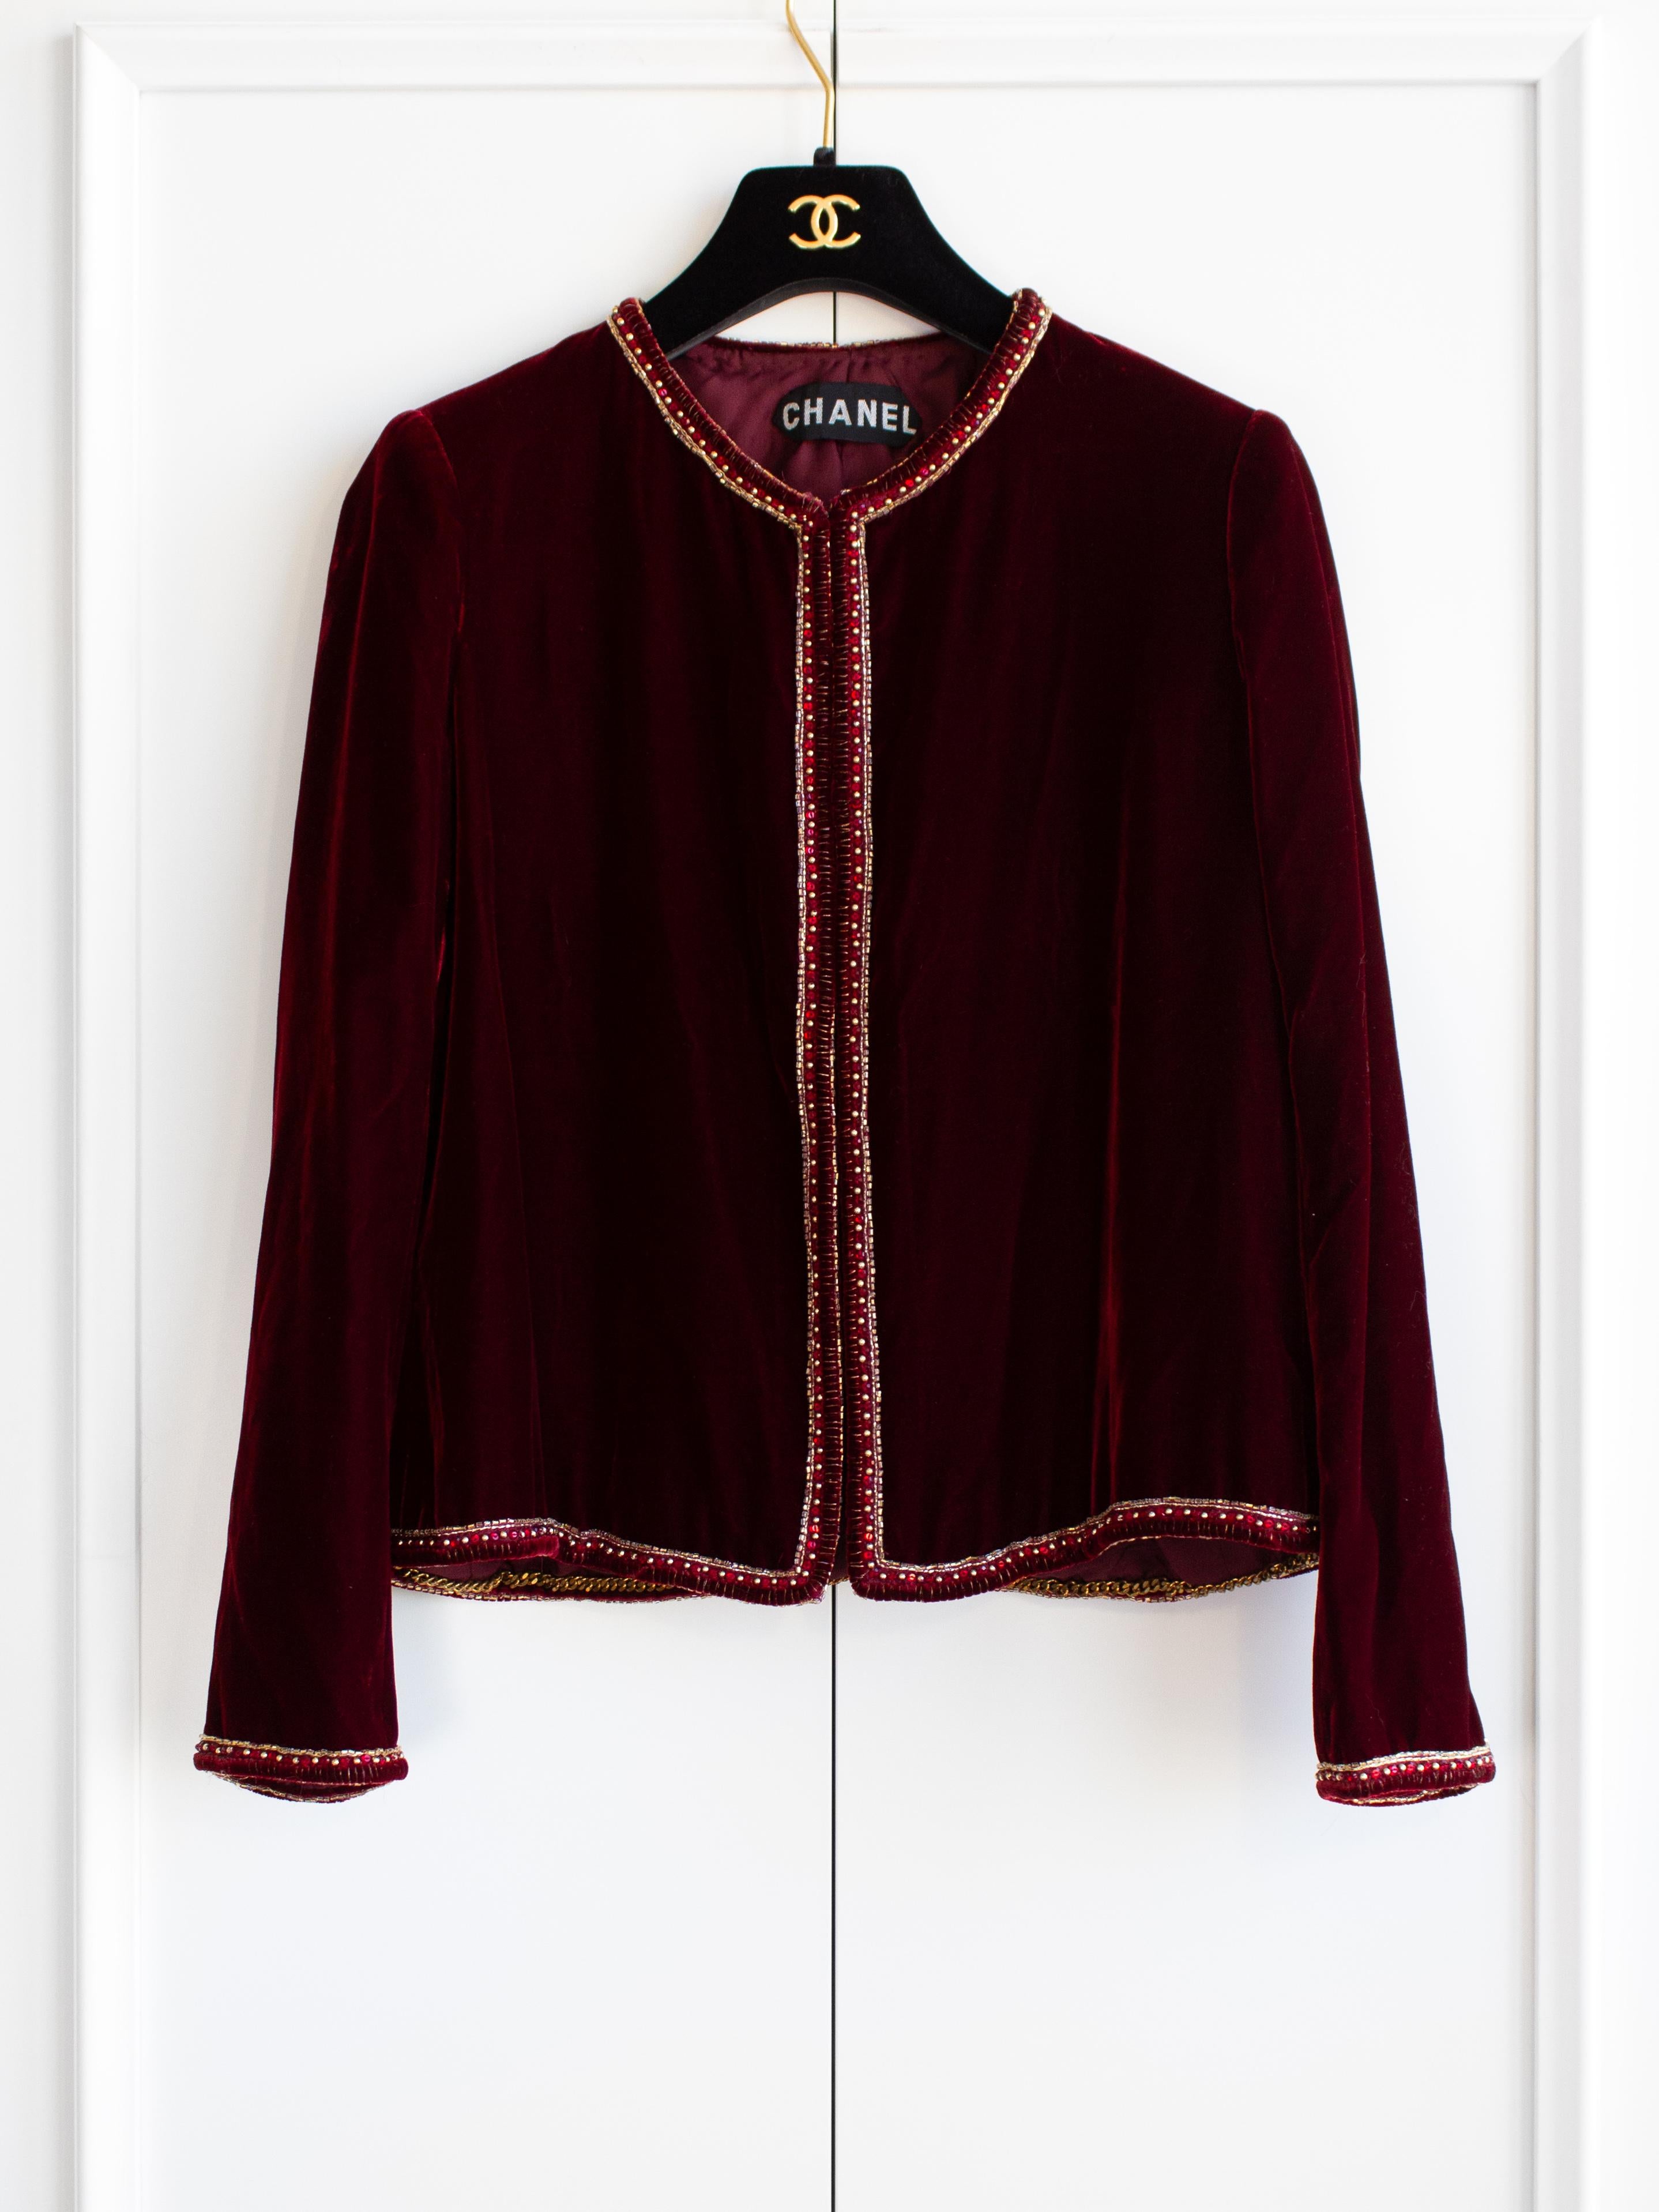 Transport yourself to the opulent past with this striking Chanel vintage haute couture jacket hailing from the late 1970s. This classic collarless jacket with a boxy cut, made from luxurious burgundy red velvet and adorned with intricate